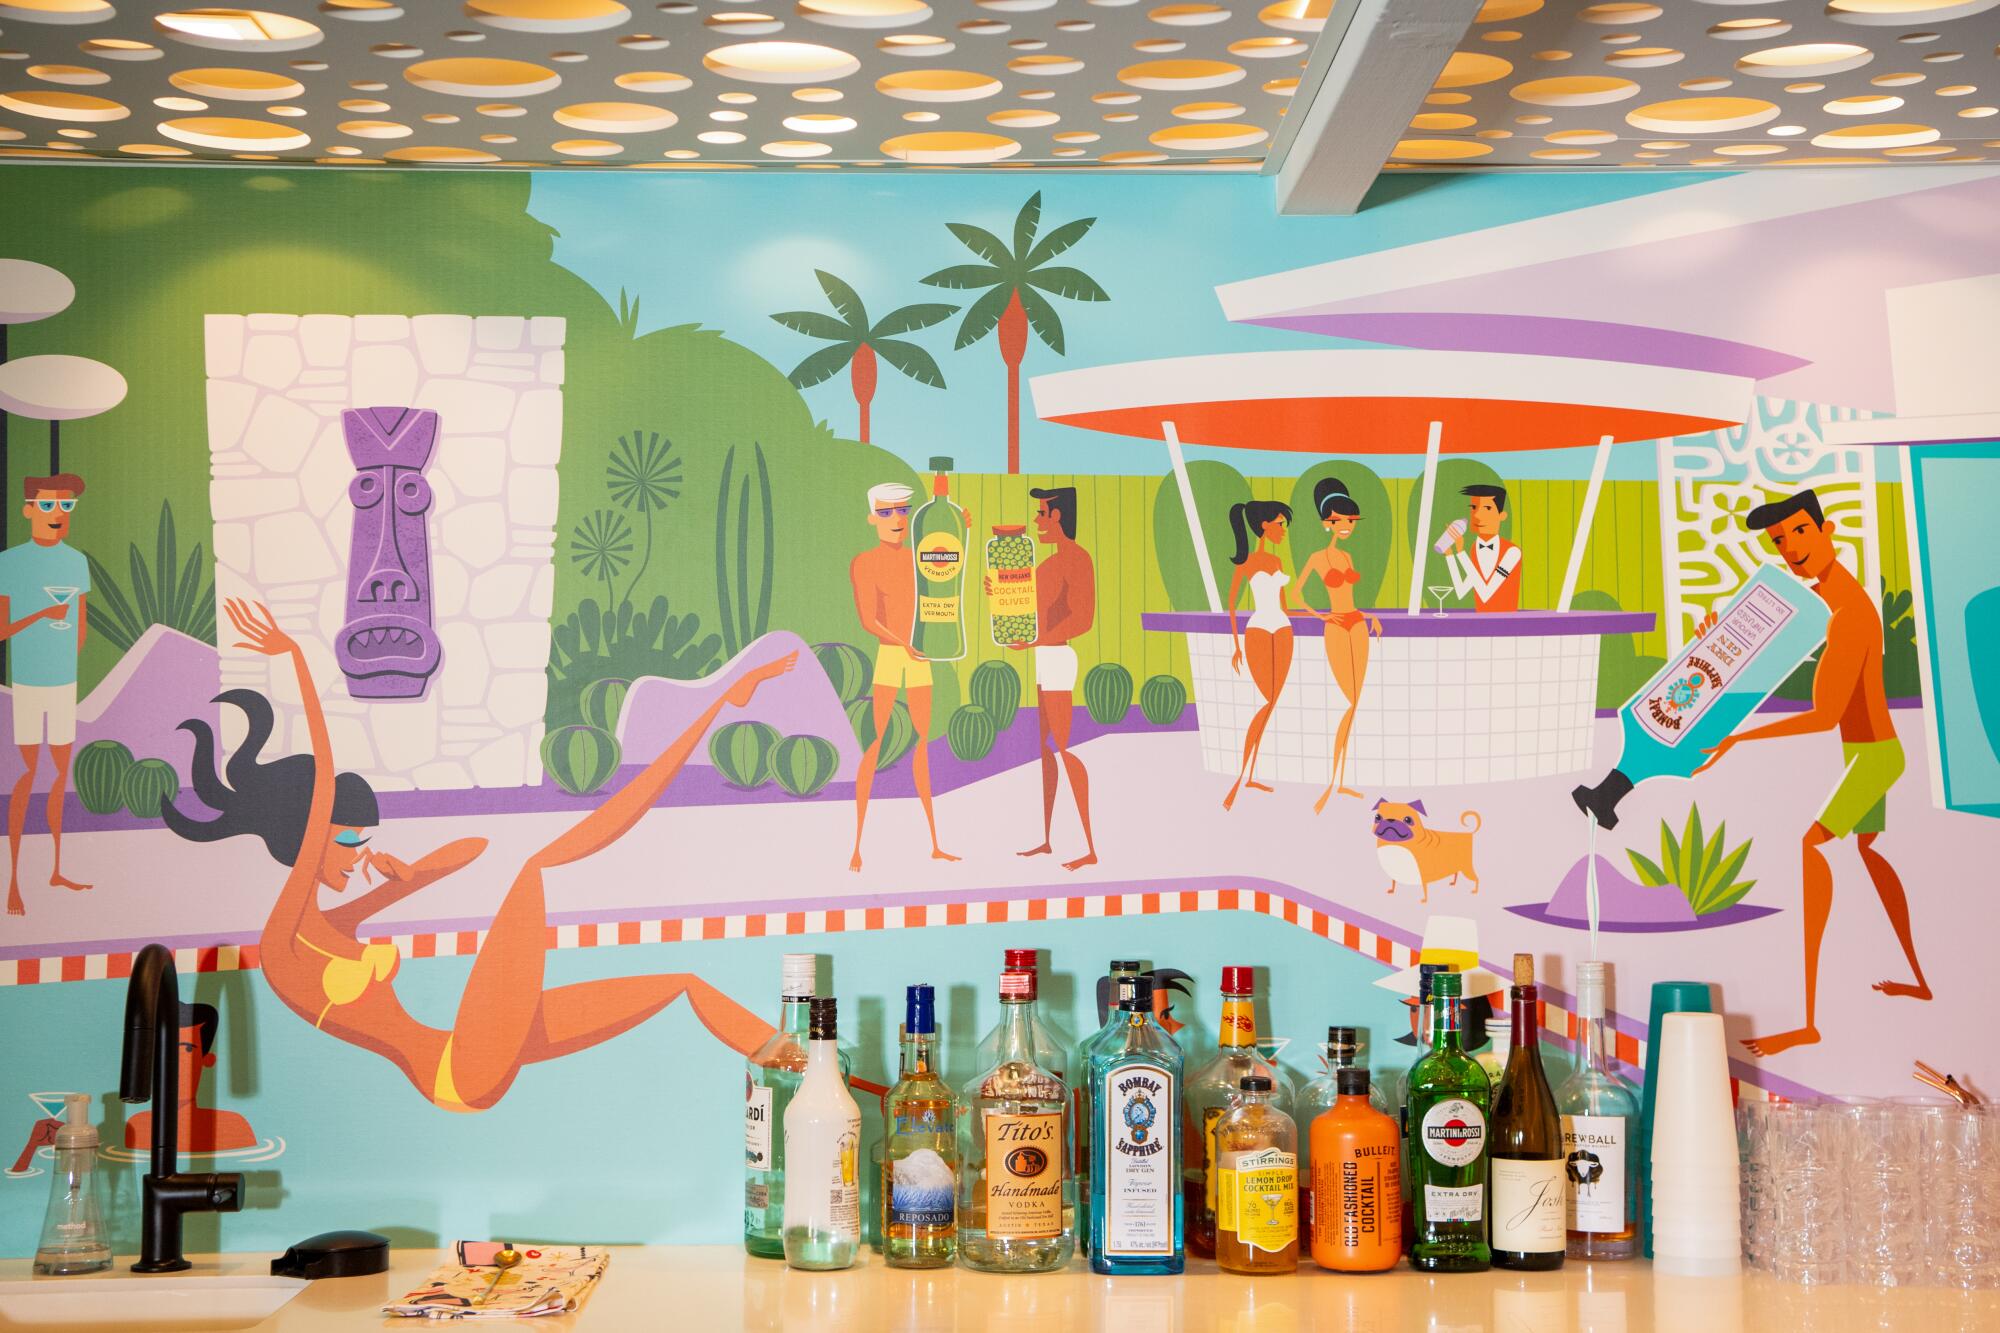 A mural behind a row of liquor bottles shows a pool party with a woman falling into the water.